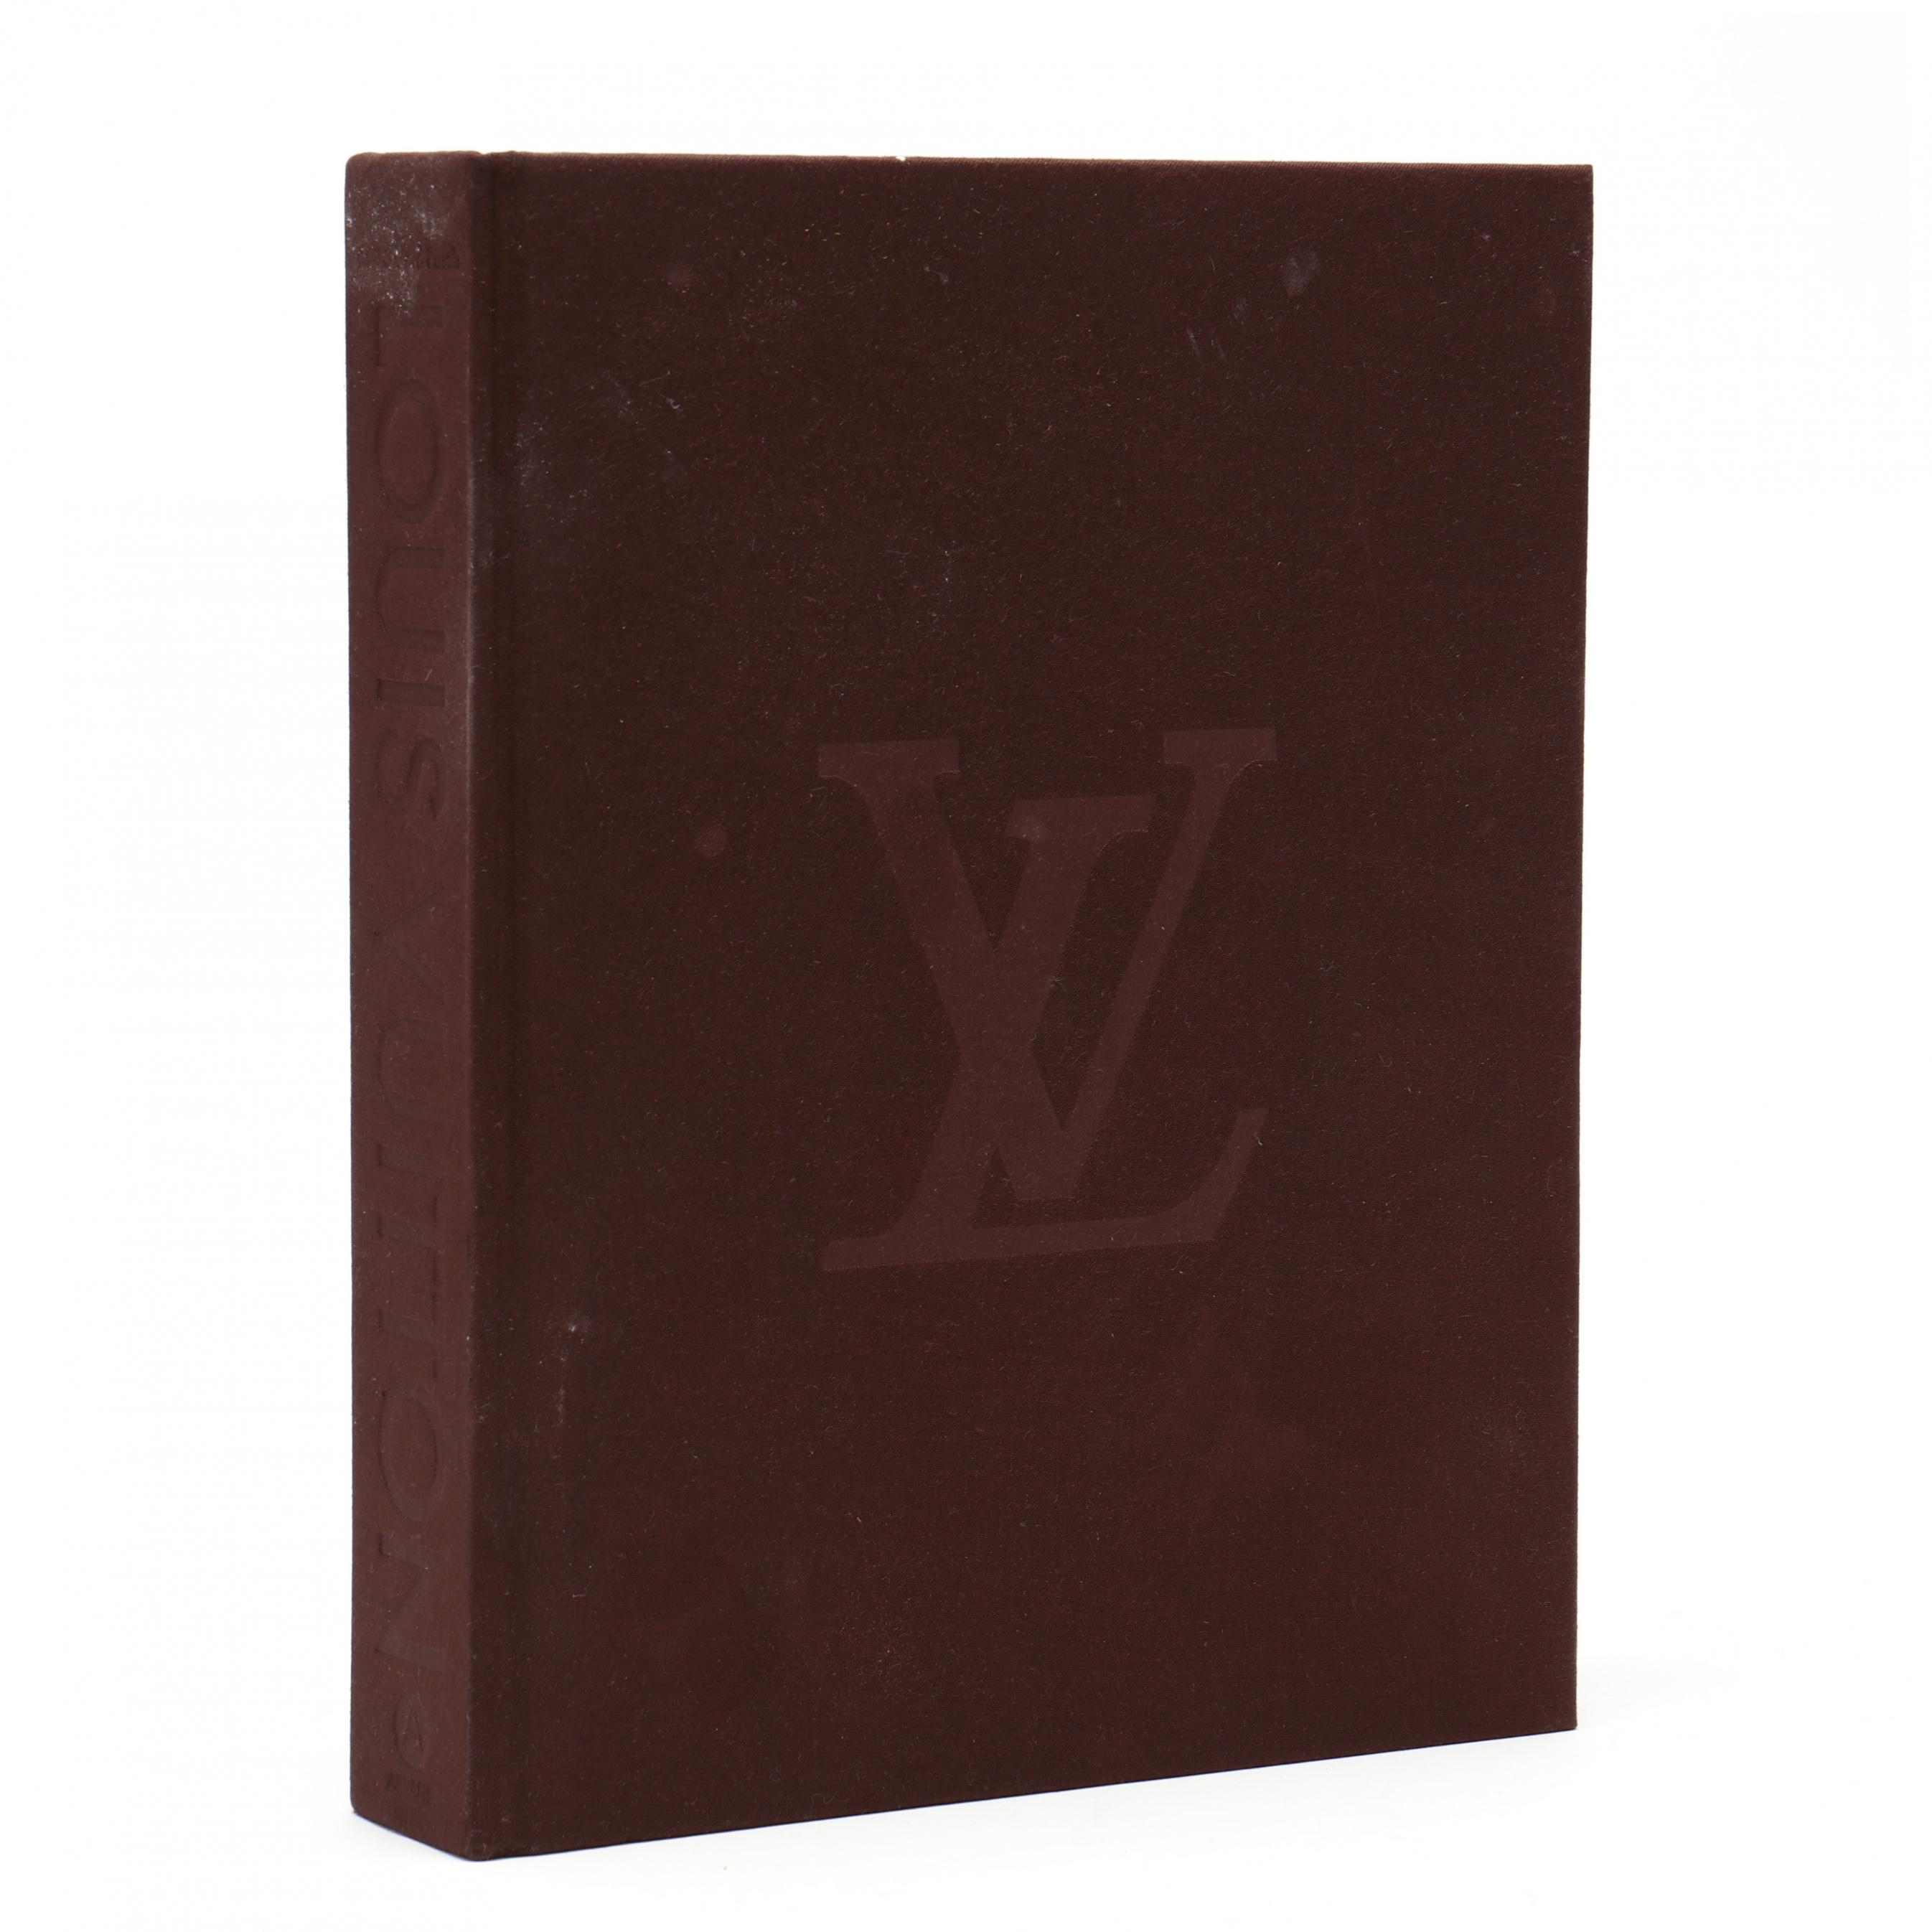 Louis Vuitton The Birth Of Modern Luxury Coffee Table Book (Lot